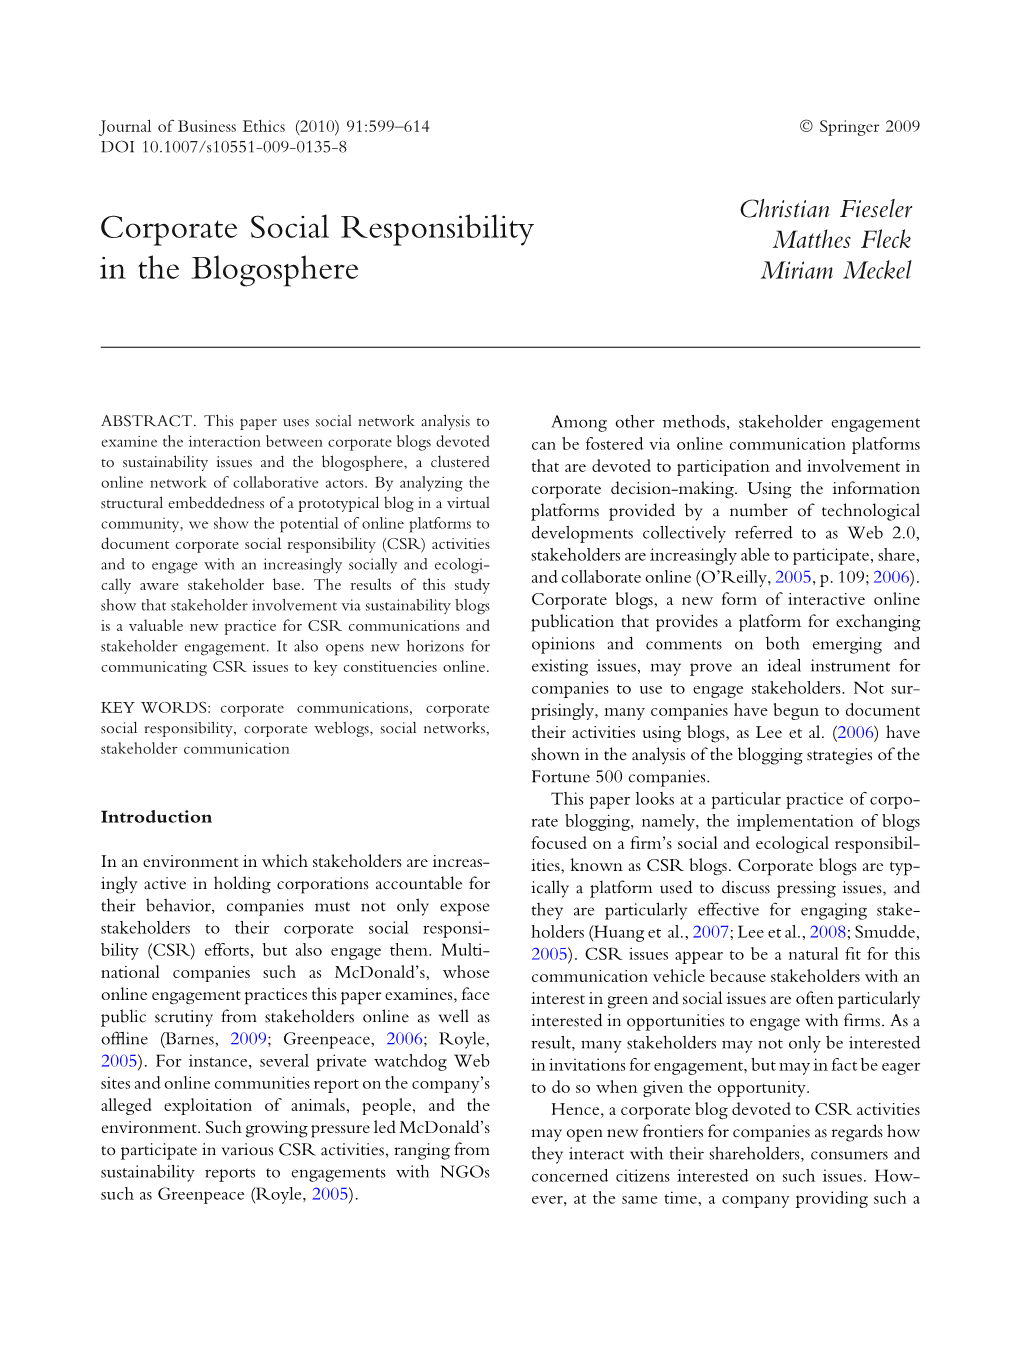 Corporate Social Responsibility in the Blogosphere 601